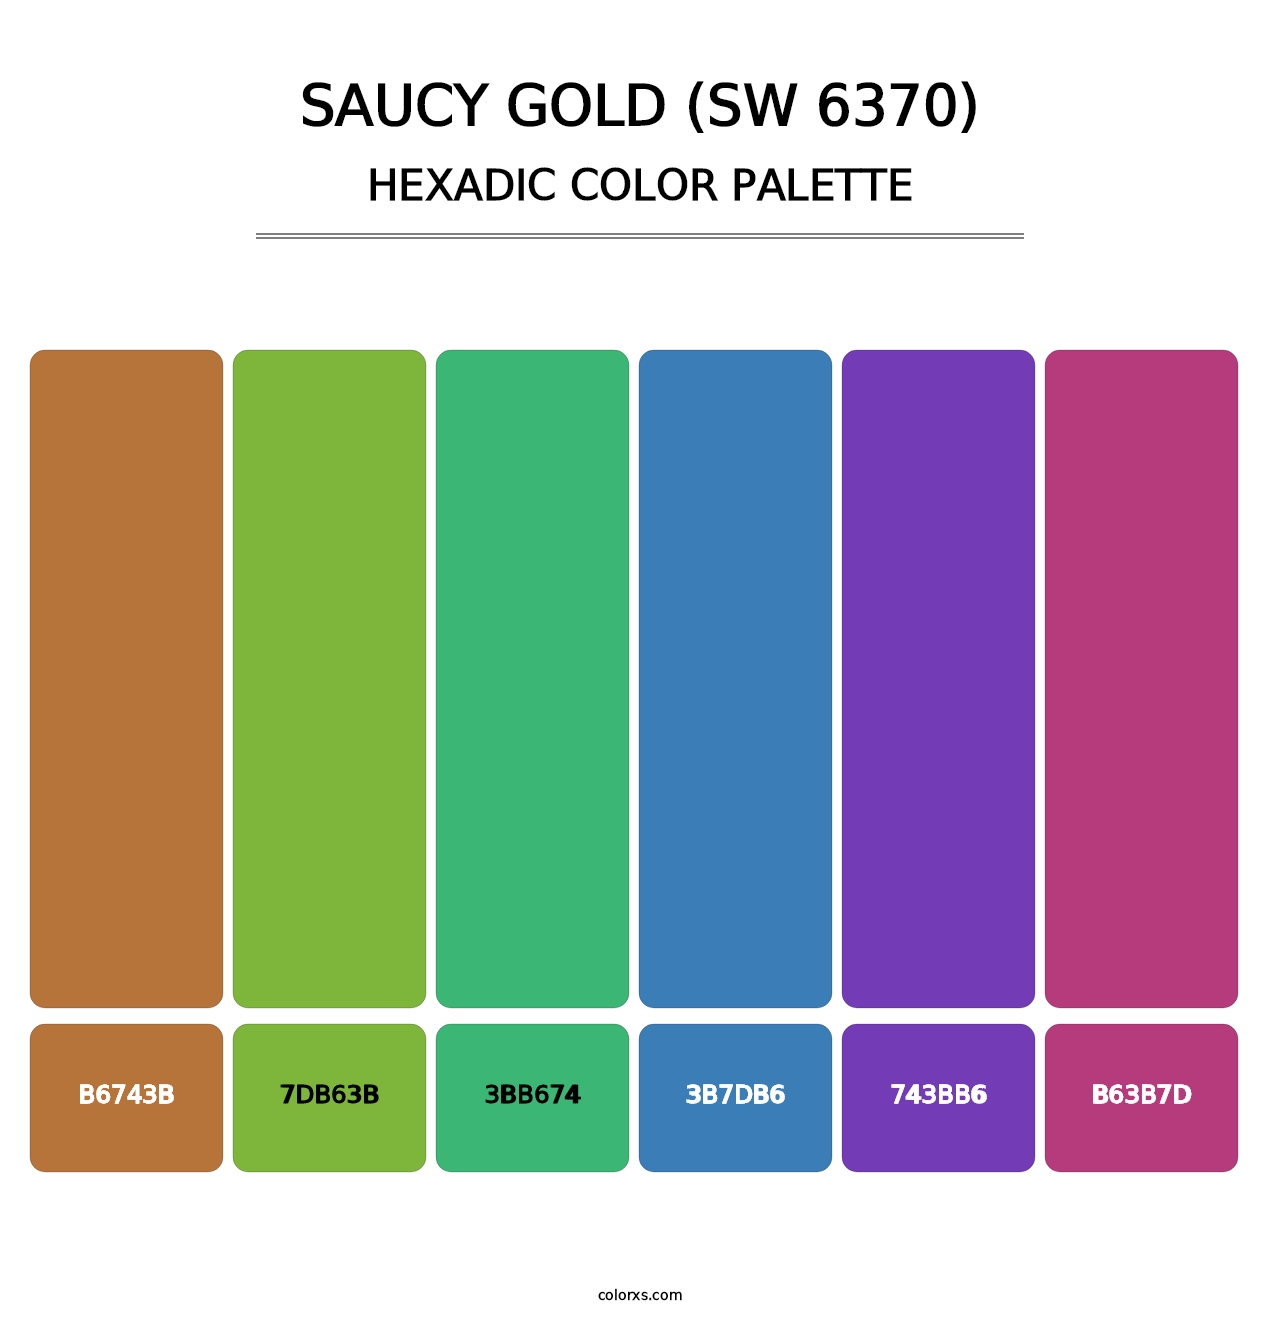 Saucy Gold (SW 6370) - Hexadic Color Palette